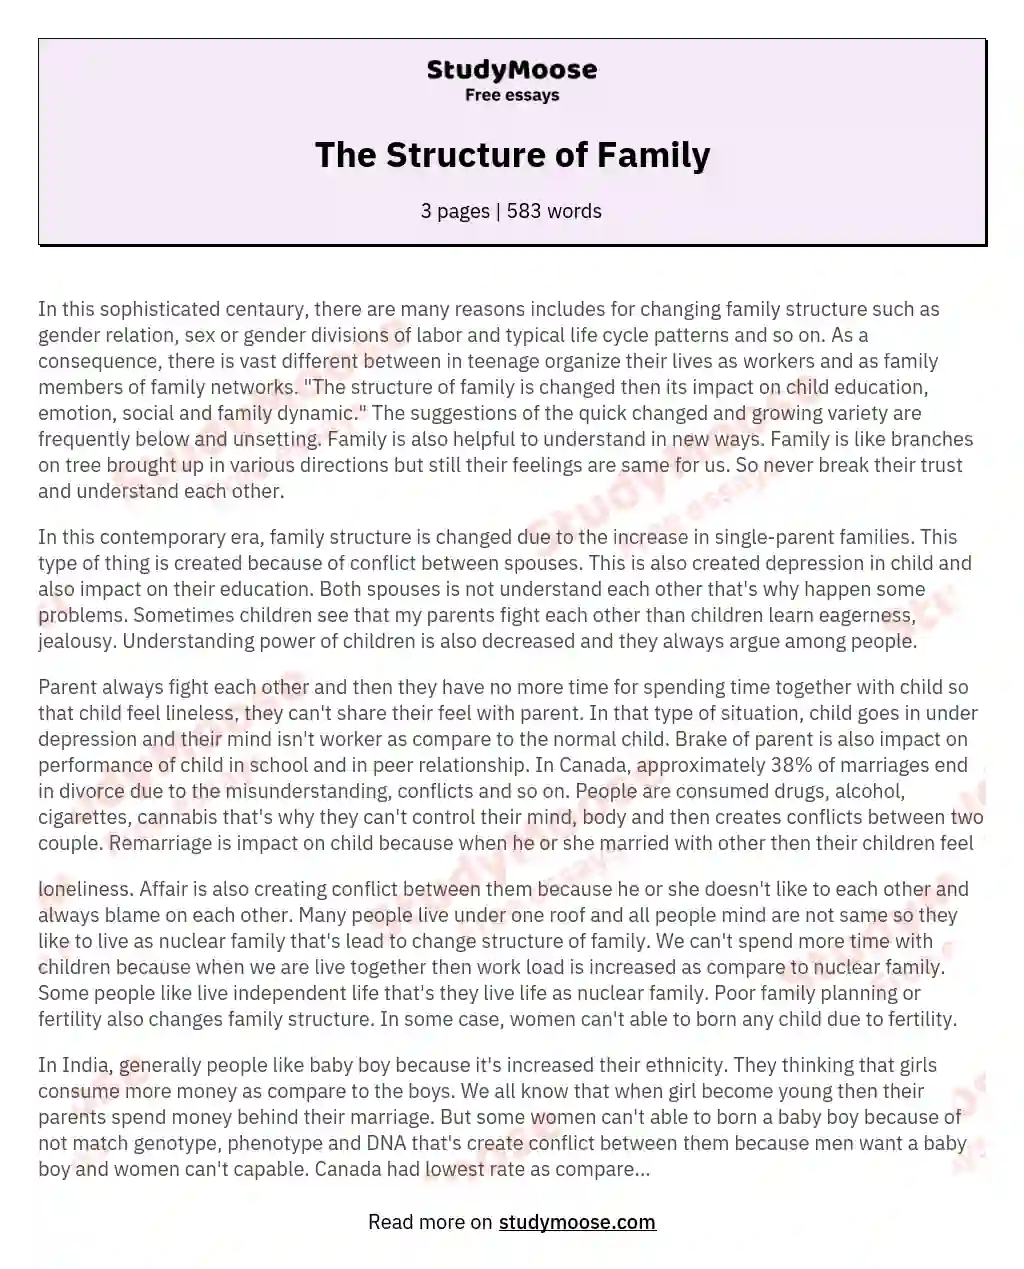 The Structure of Family essay